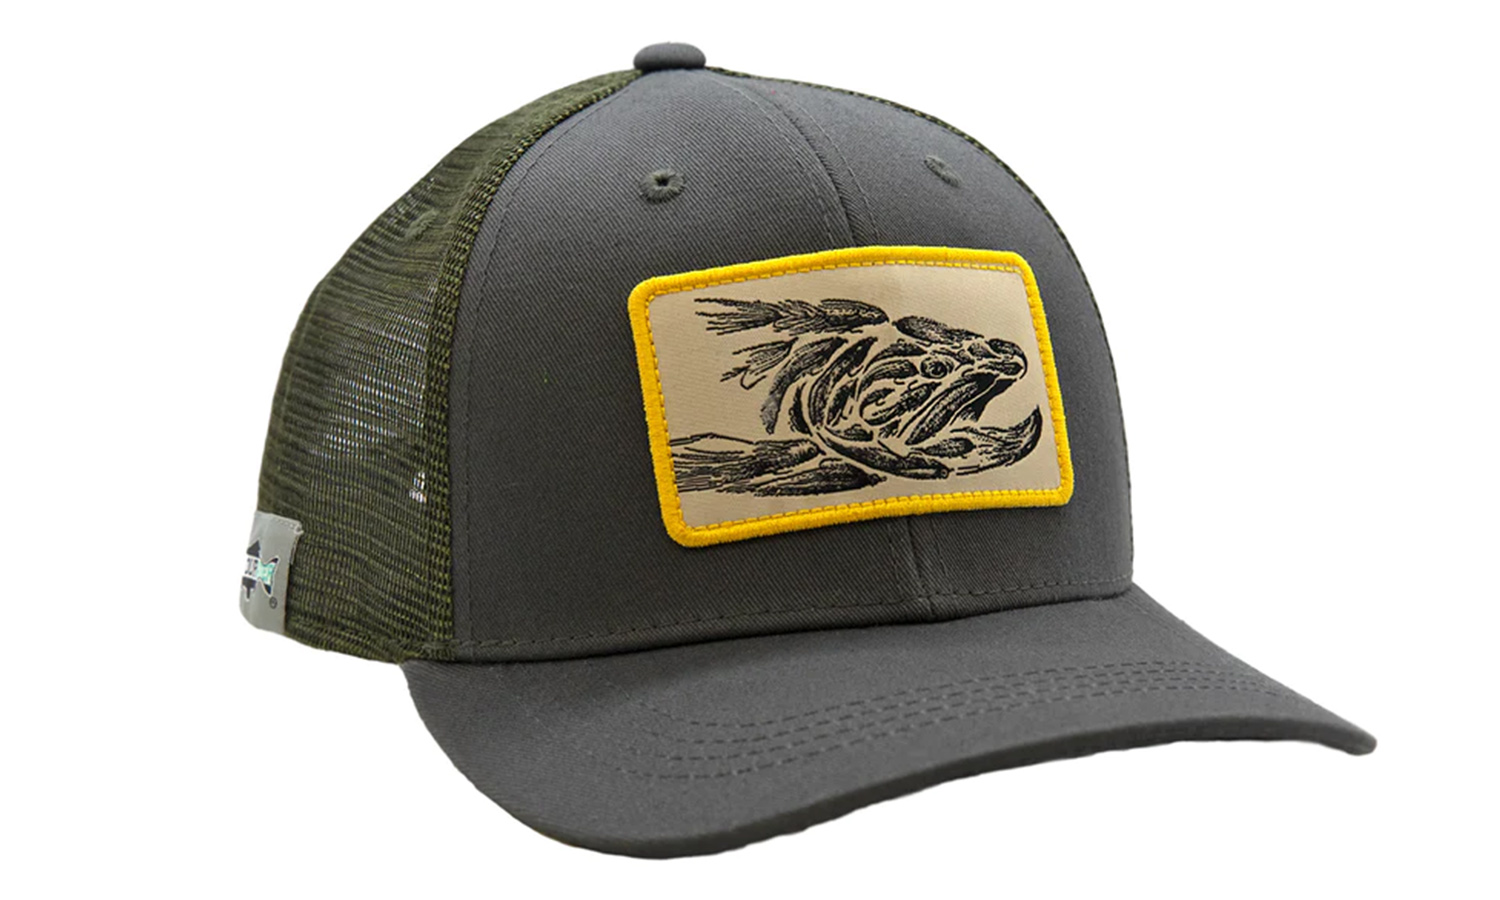 Trout Streamers - Hats - Alaska Fly Fishing Goods